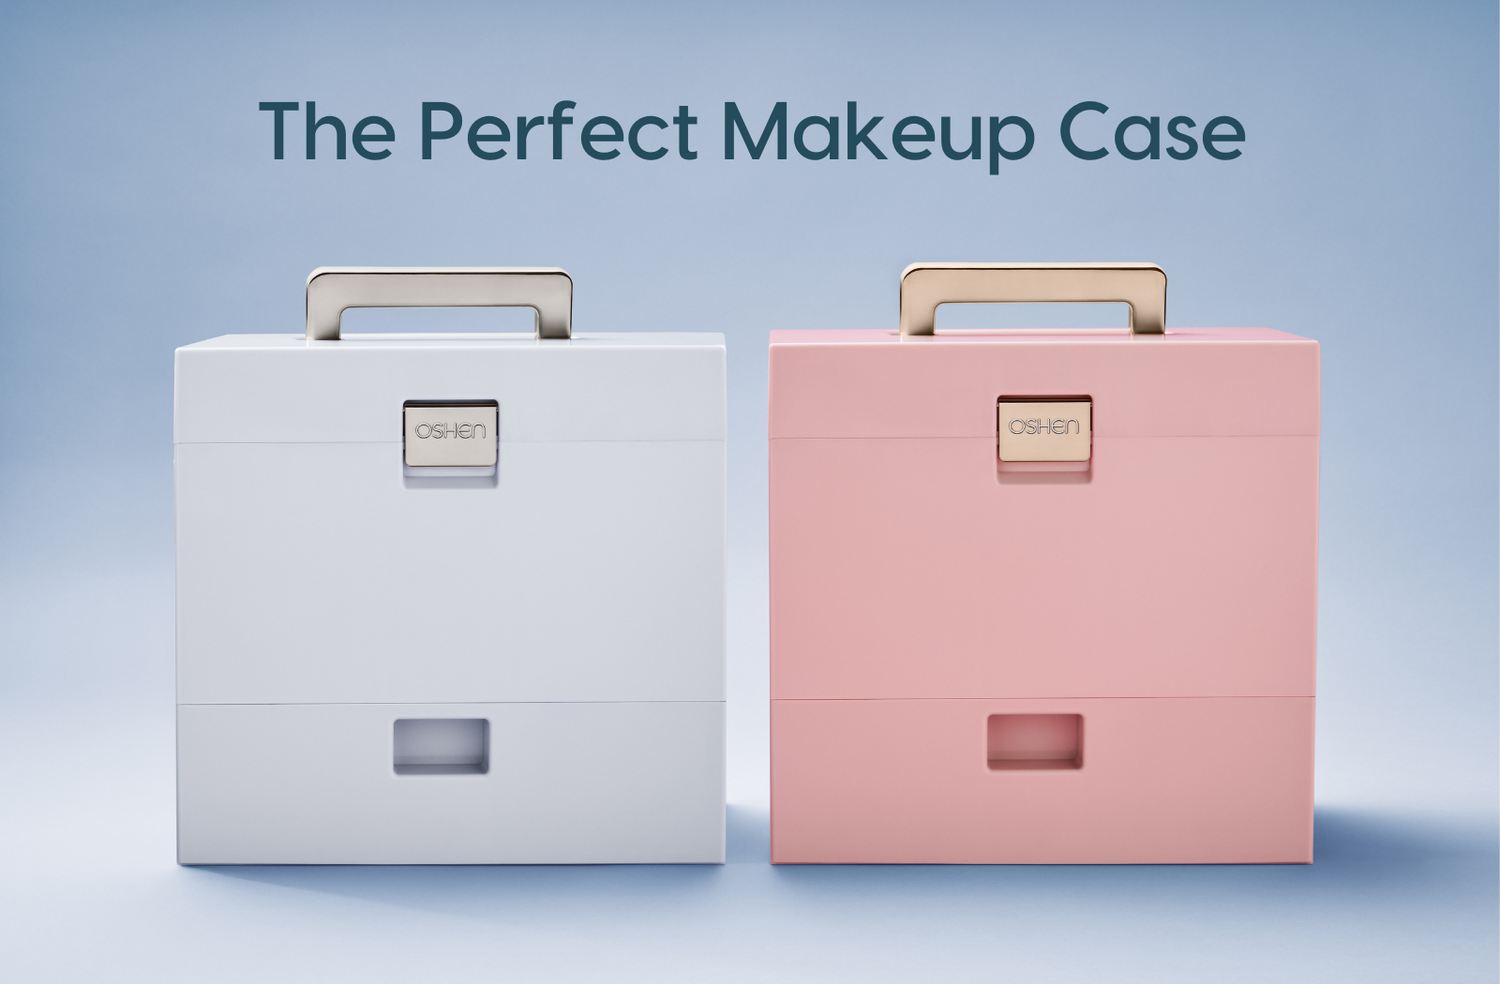 OSHEN makeup case. The perfect makeup case. Makeup storage made simple and sustainable.